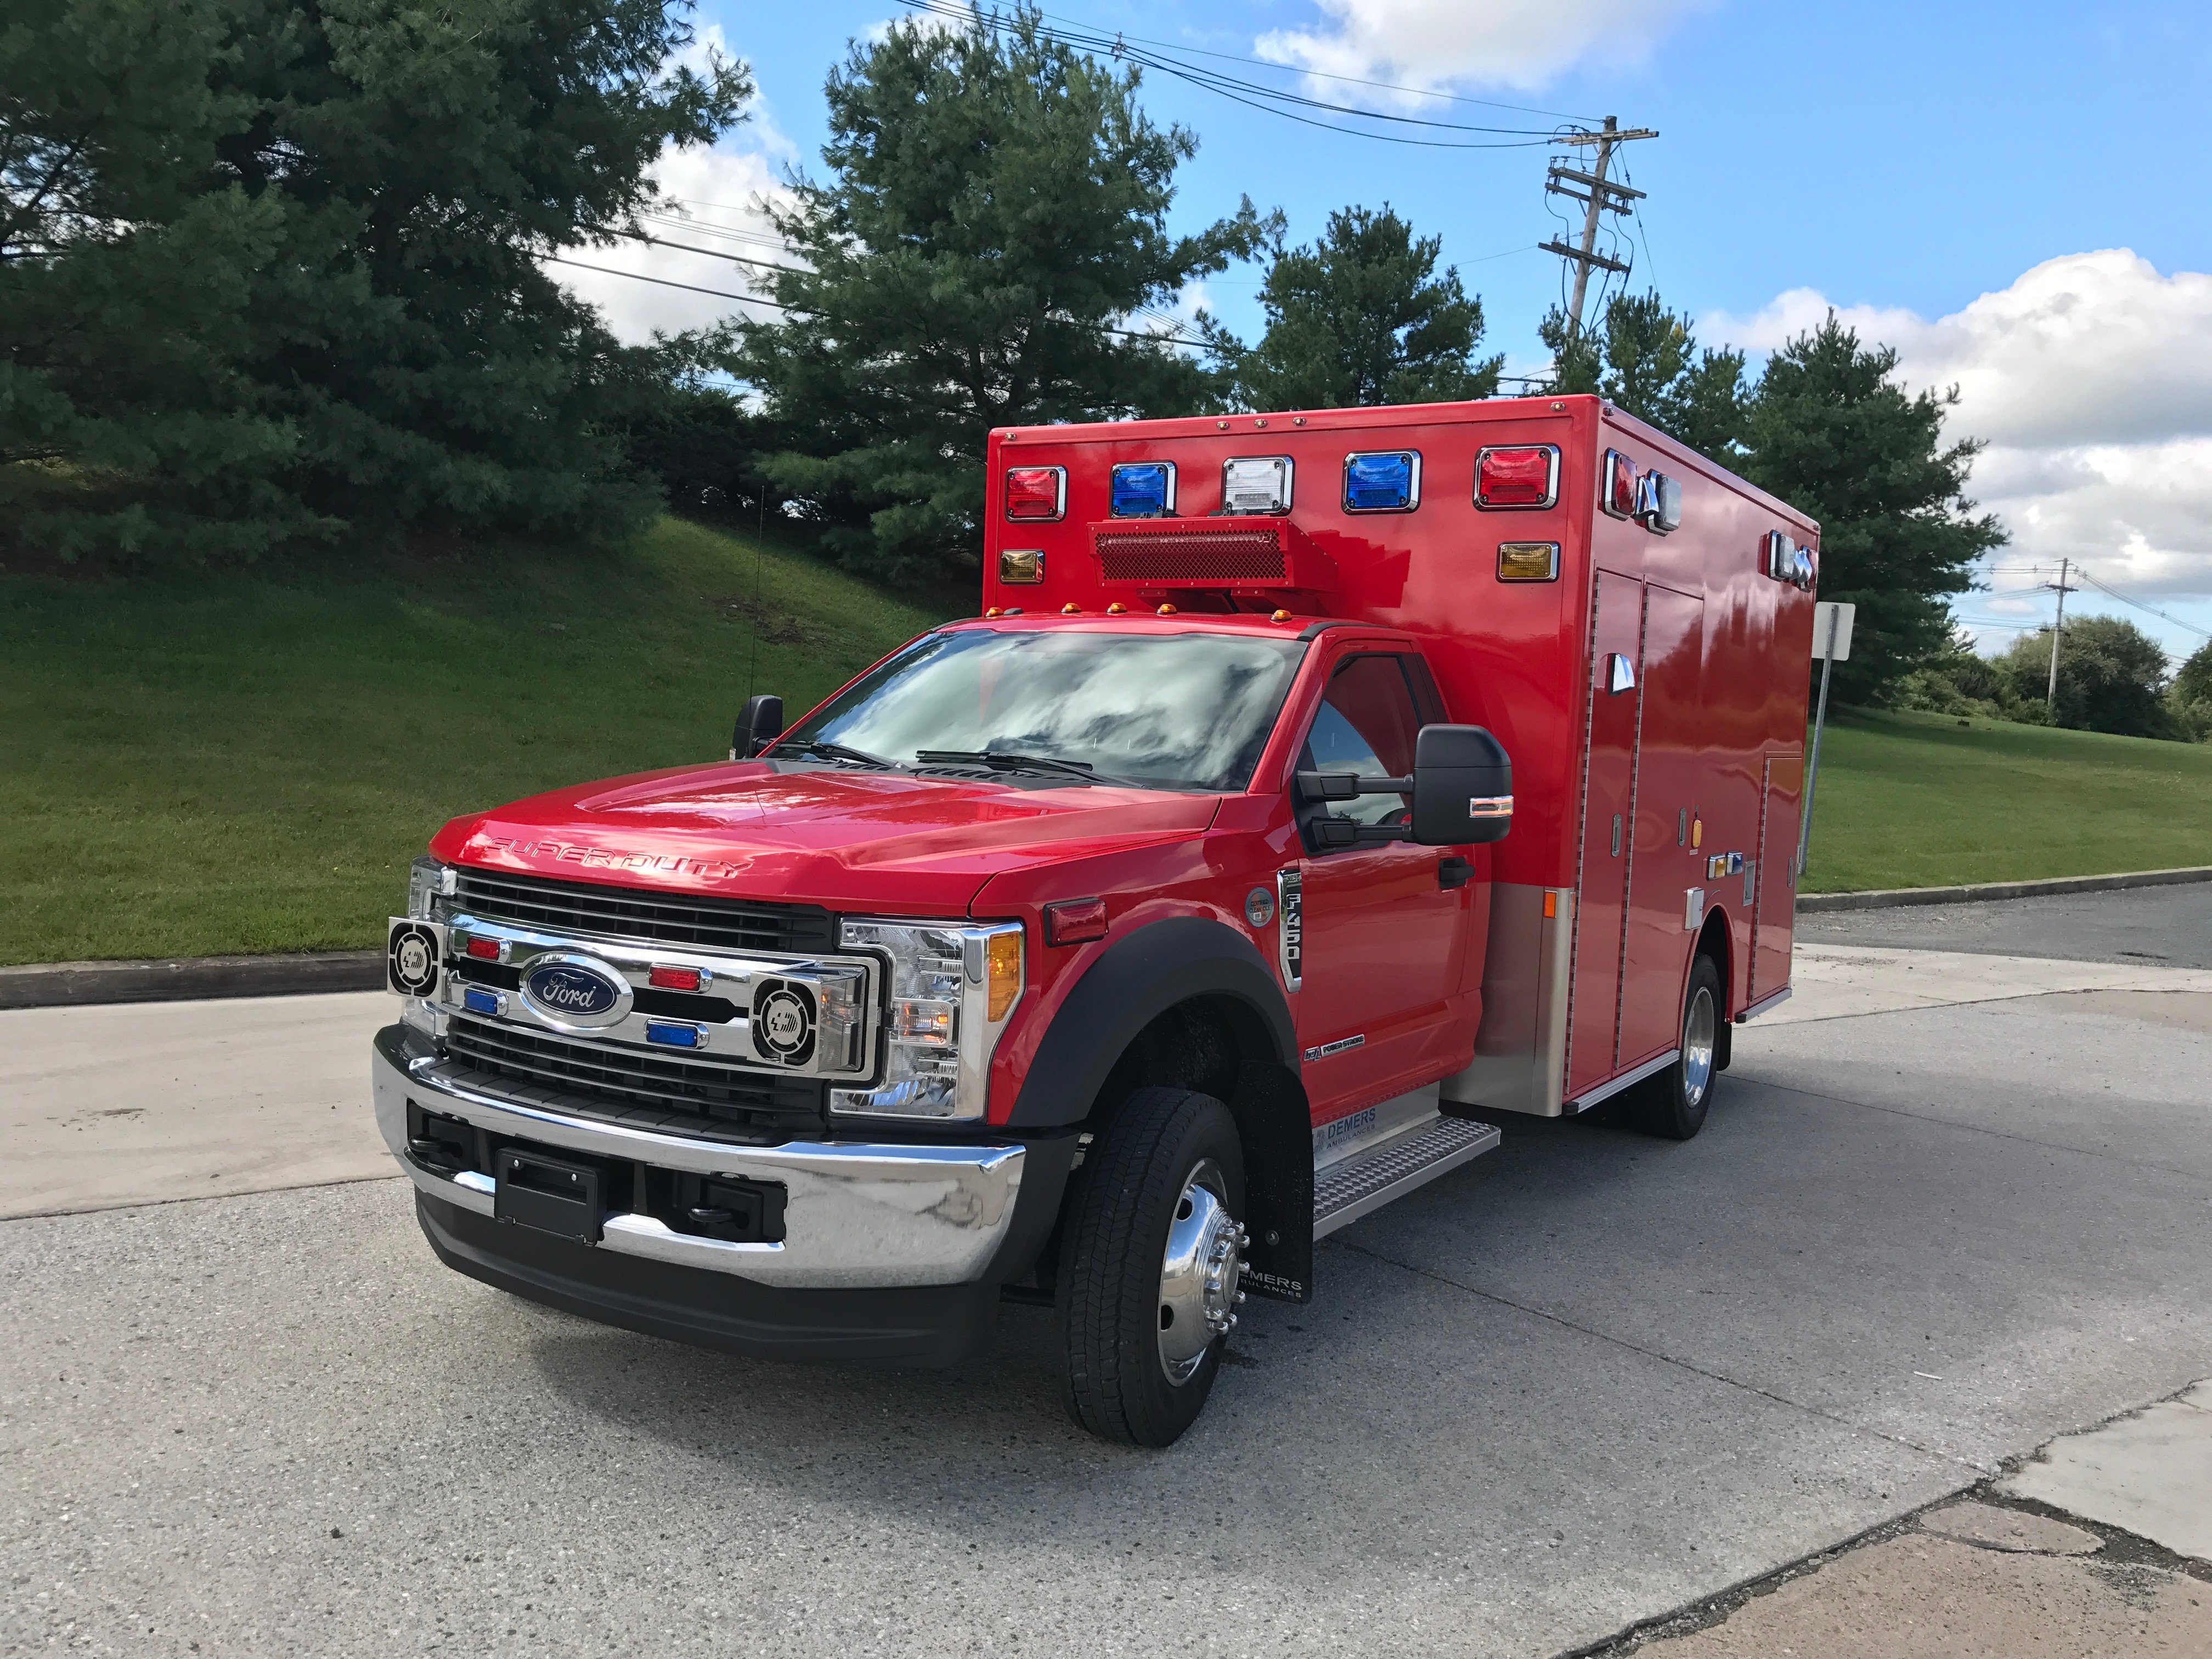 First Priority Emergency Vehicles New Ambulance and Ambulance Remounts